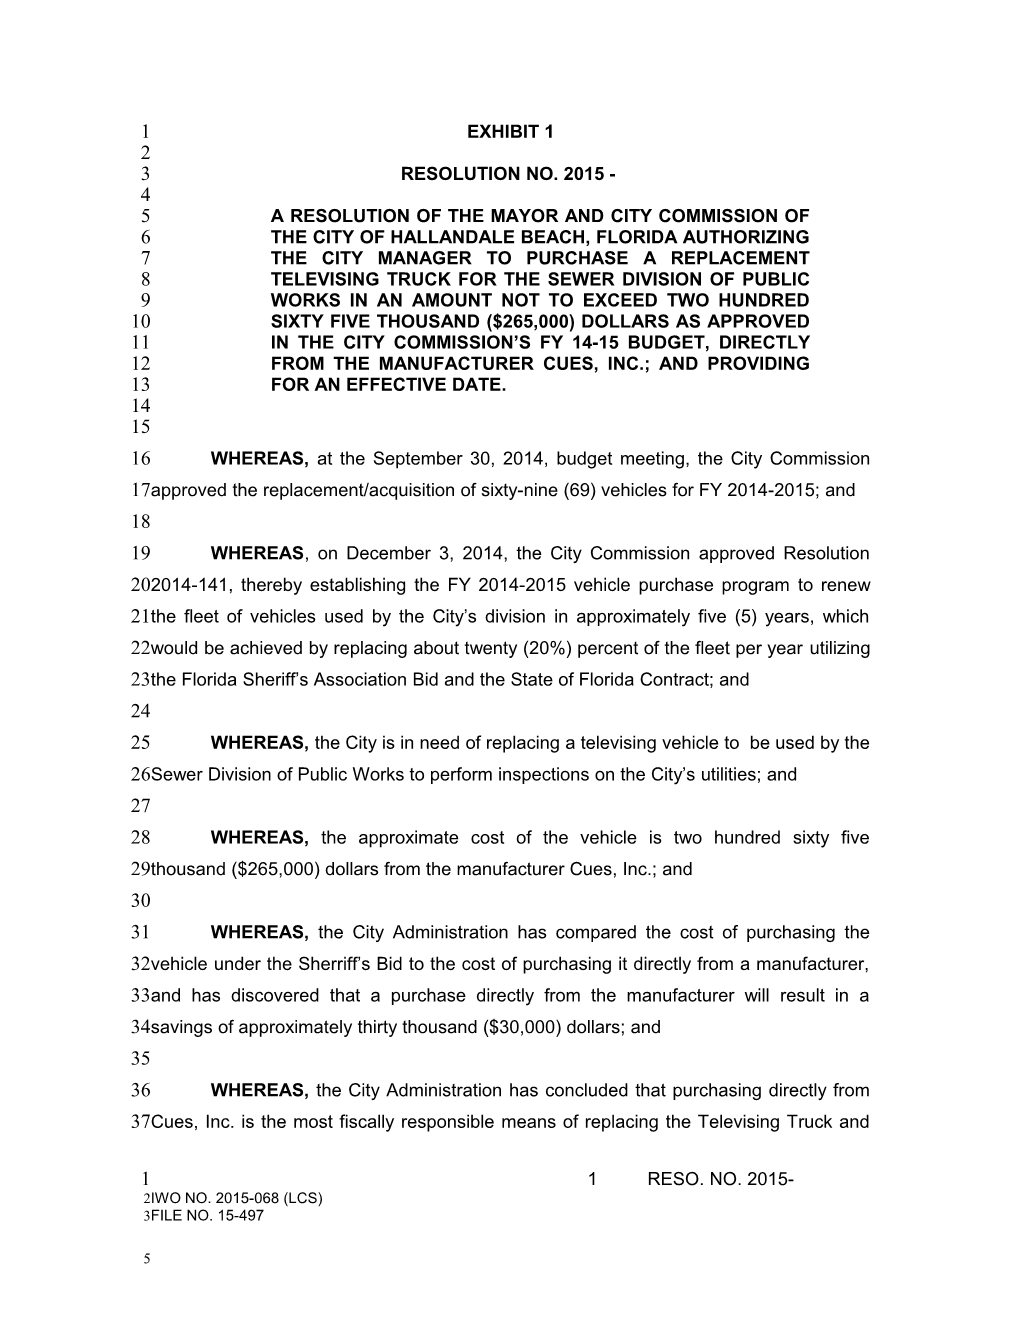 A Resolution of the Mayor and City Commission of the City of Hallandale Beach